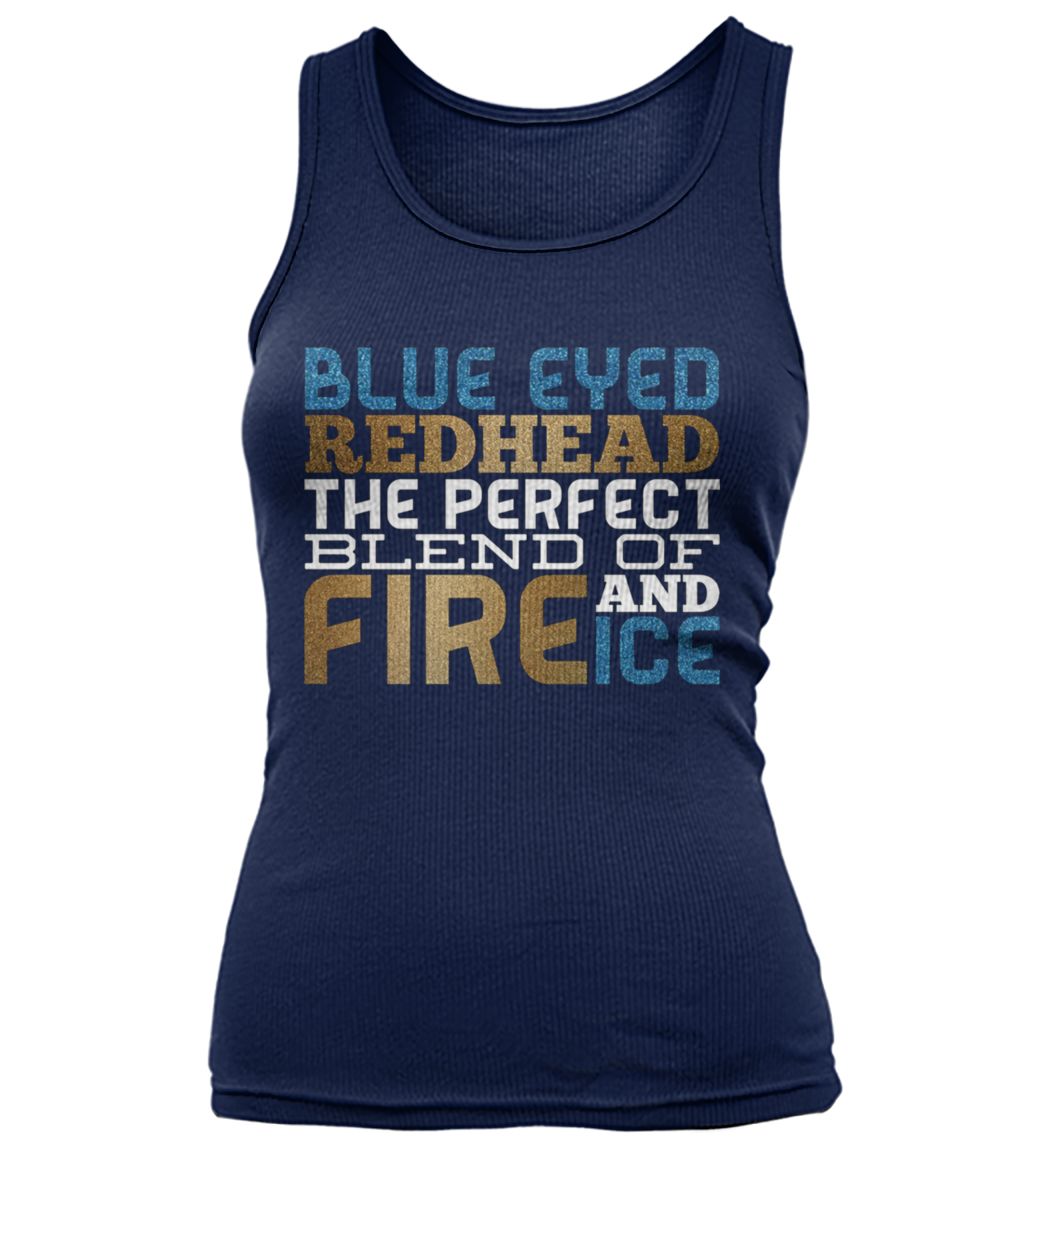 Blue eyed redhead the perfect blend of fire and ice women's tank top